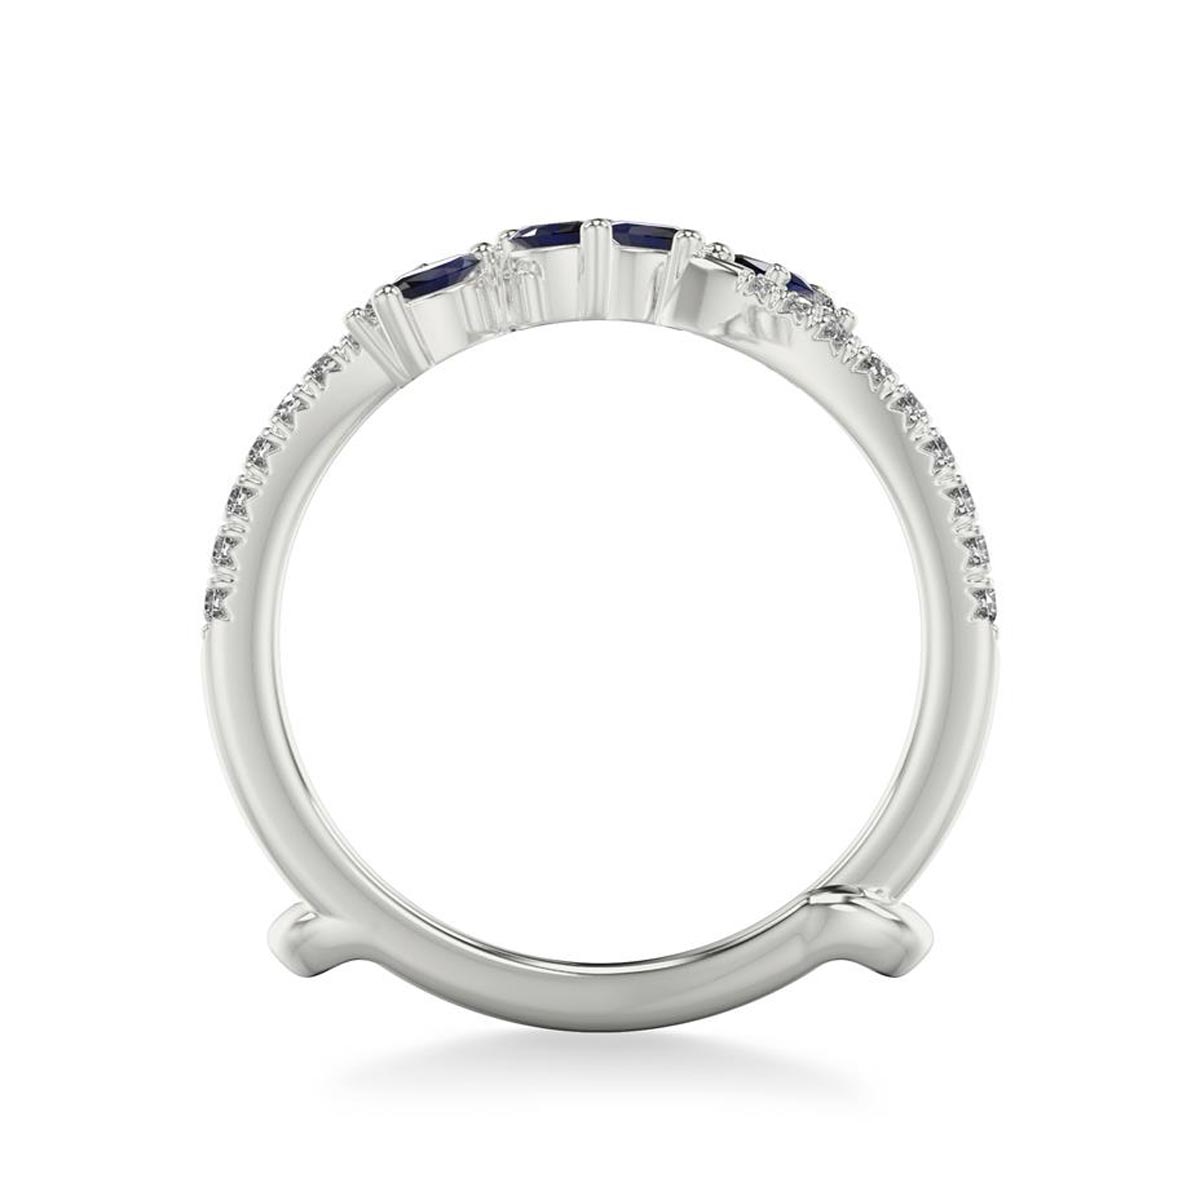 Artcarved Diamond and Sapphire Wedding Ring Insert in 14kt White Gold (1/10ct tw)